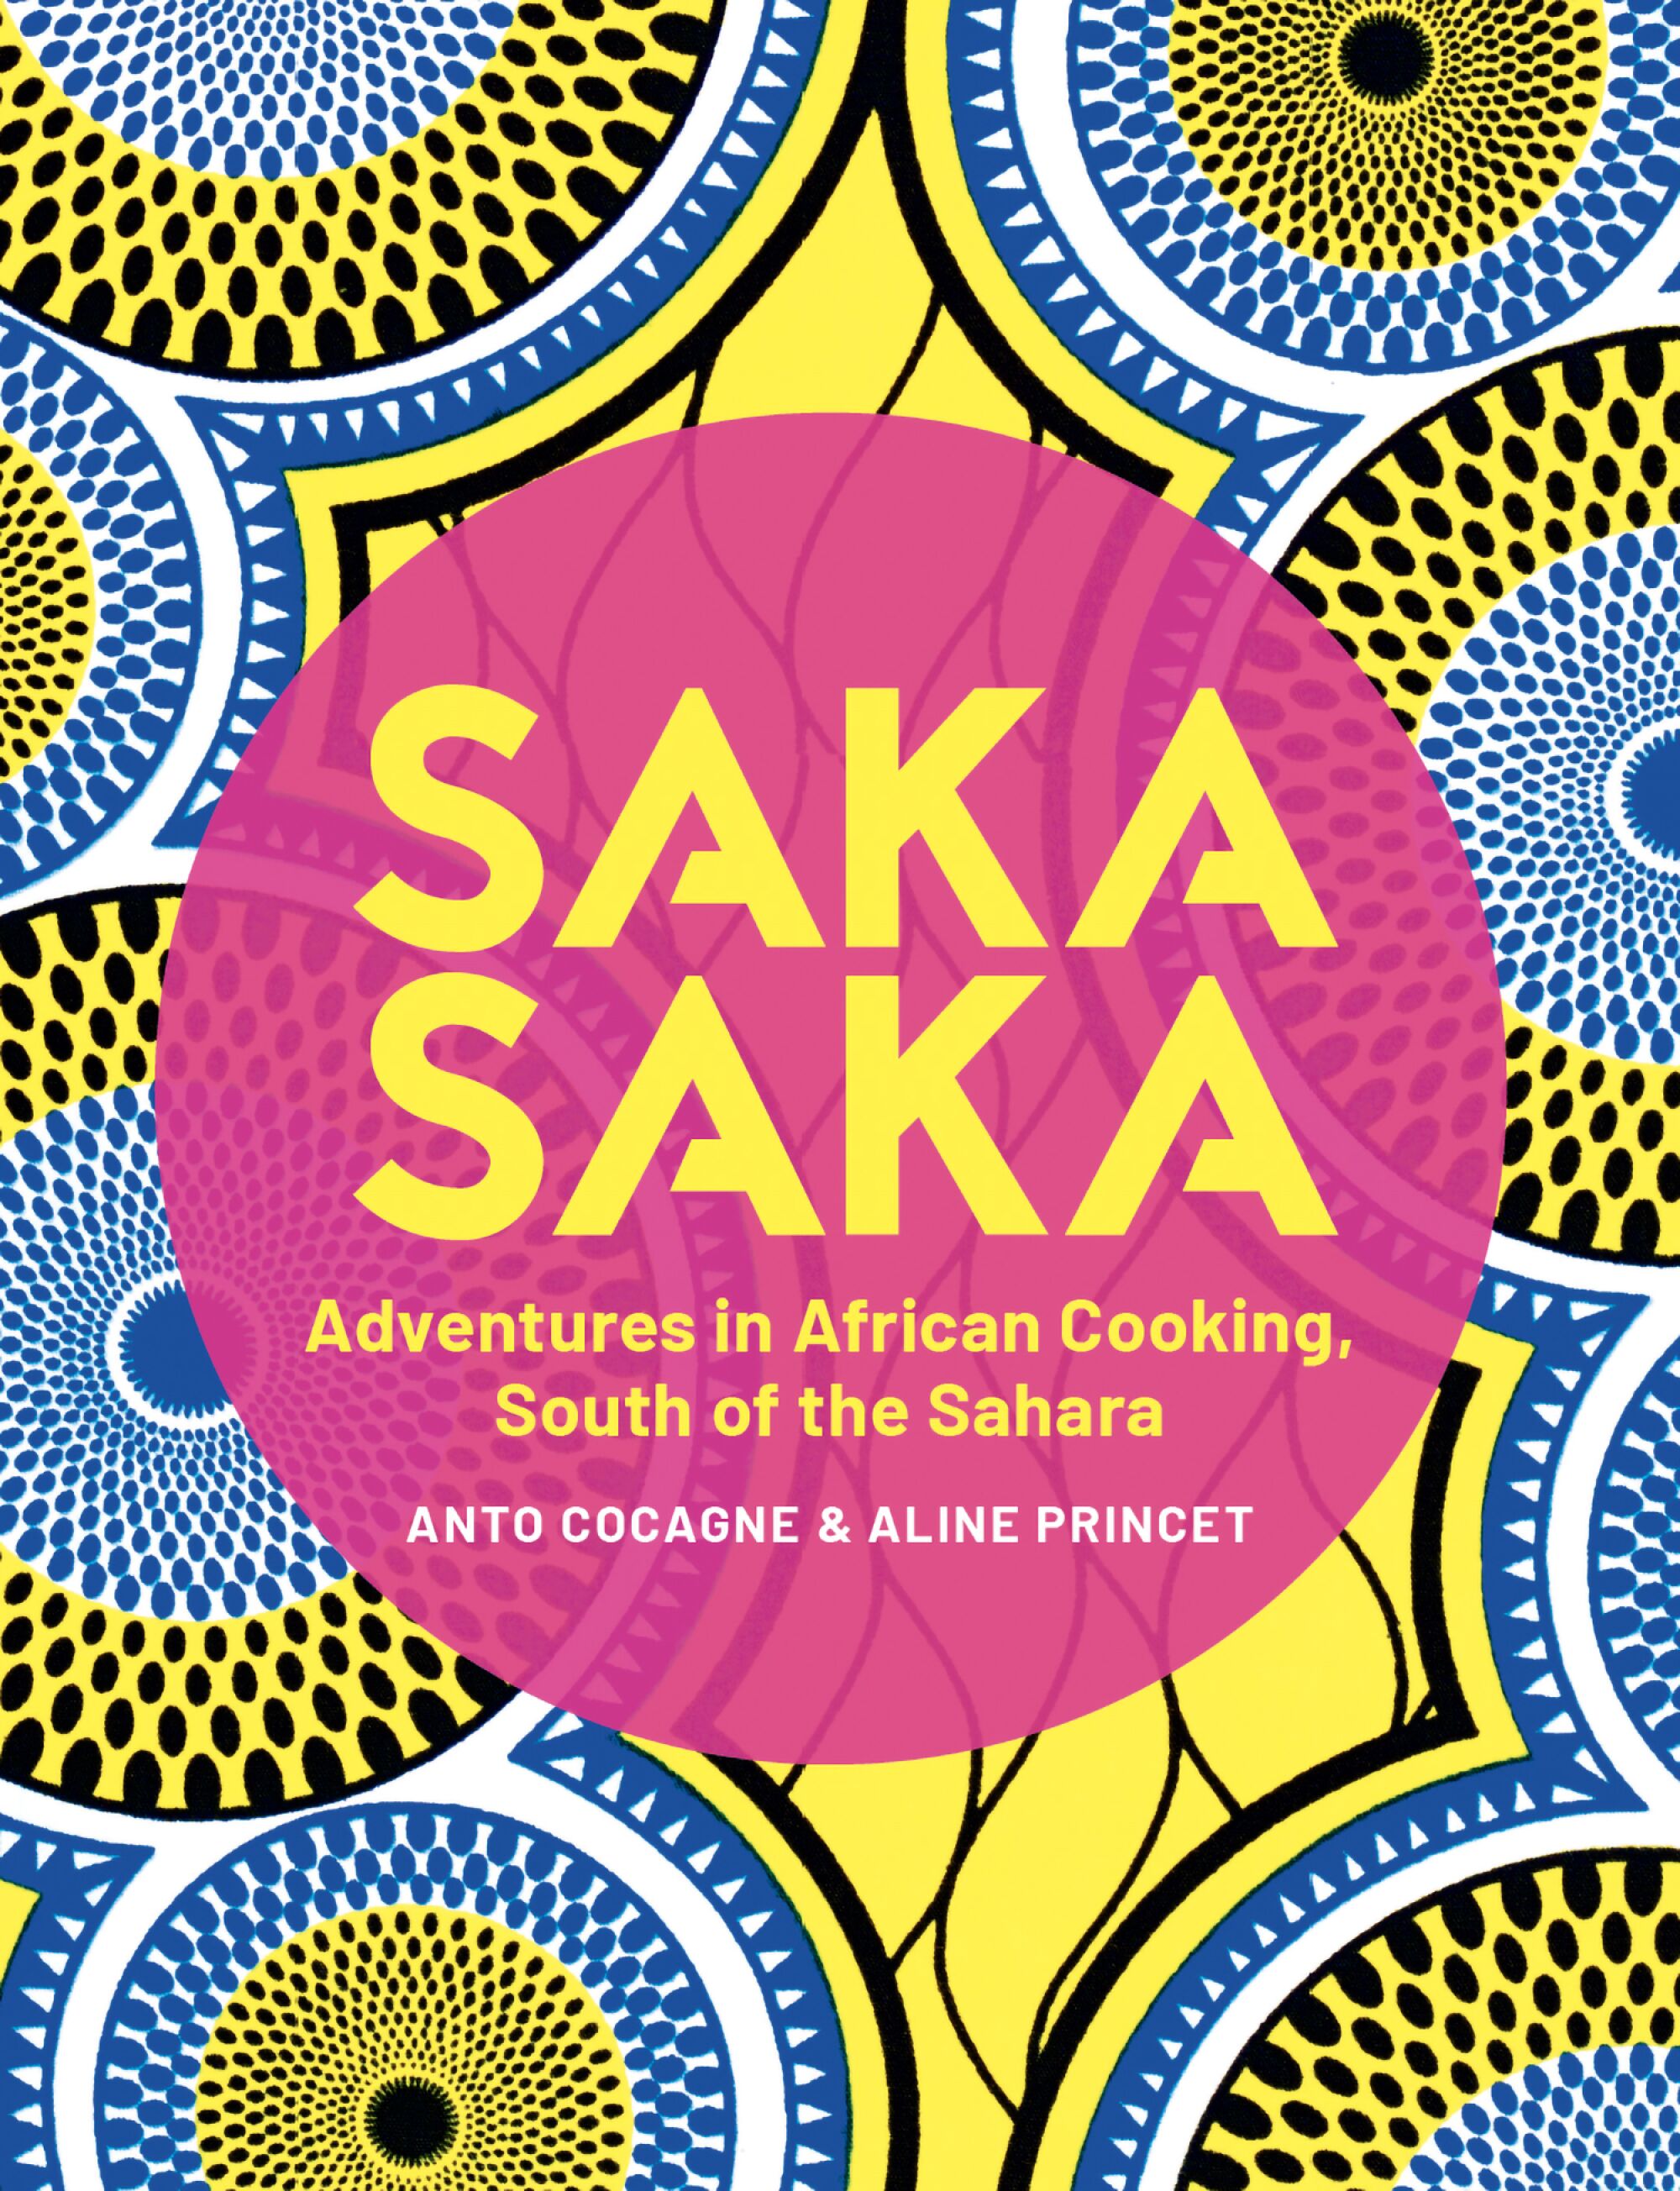 :Saka Saka: Adventures in African Cooking, South of the Sahara" by Anto Cocagne & Aline Princet